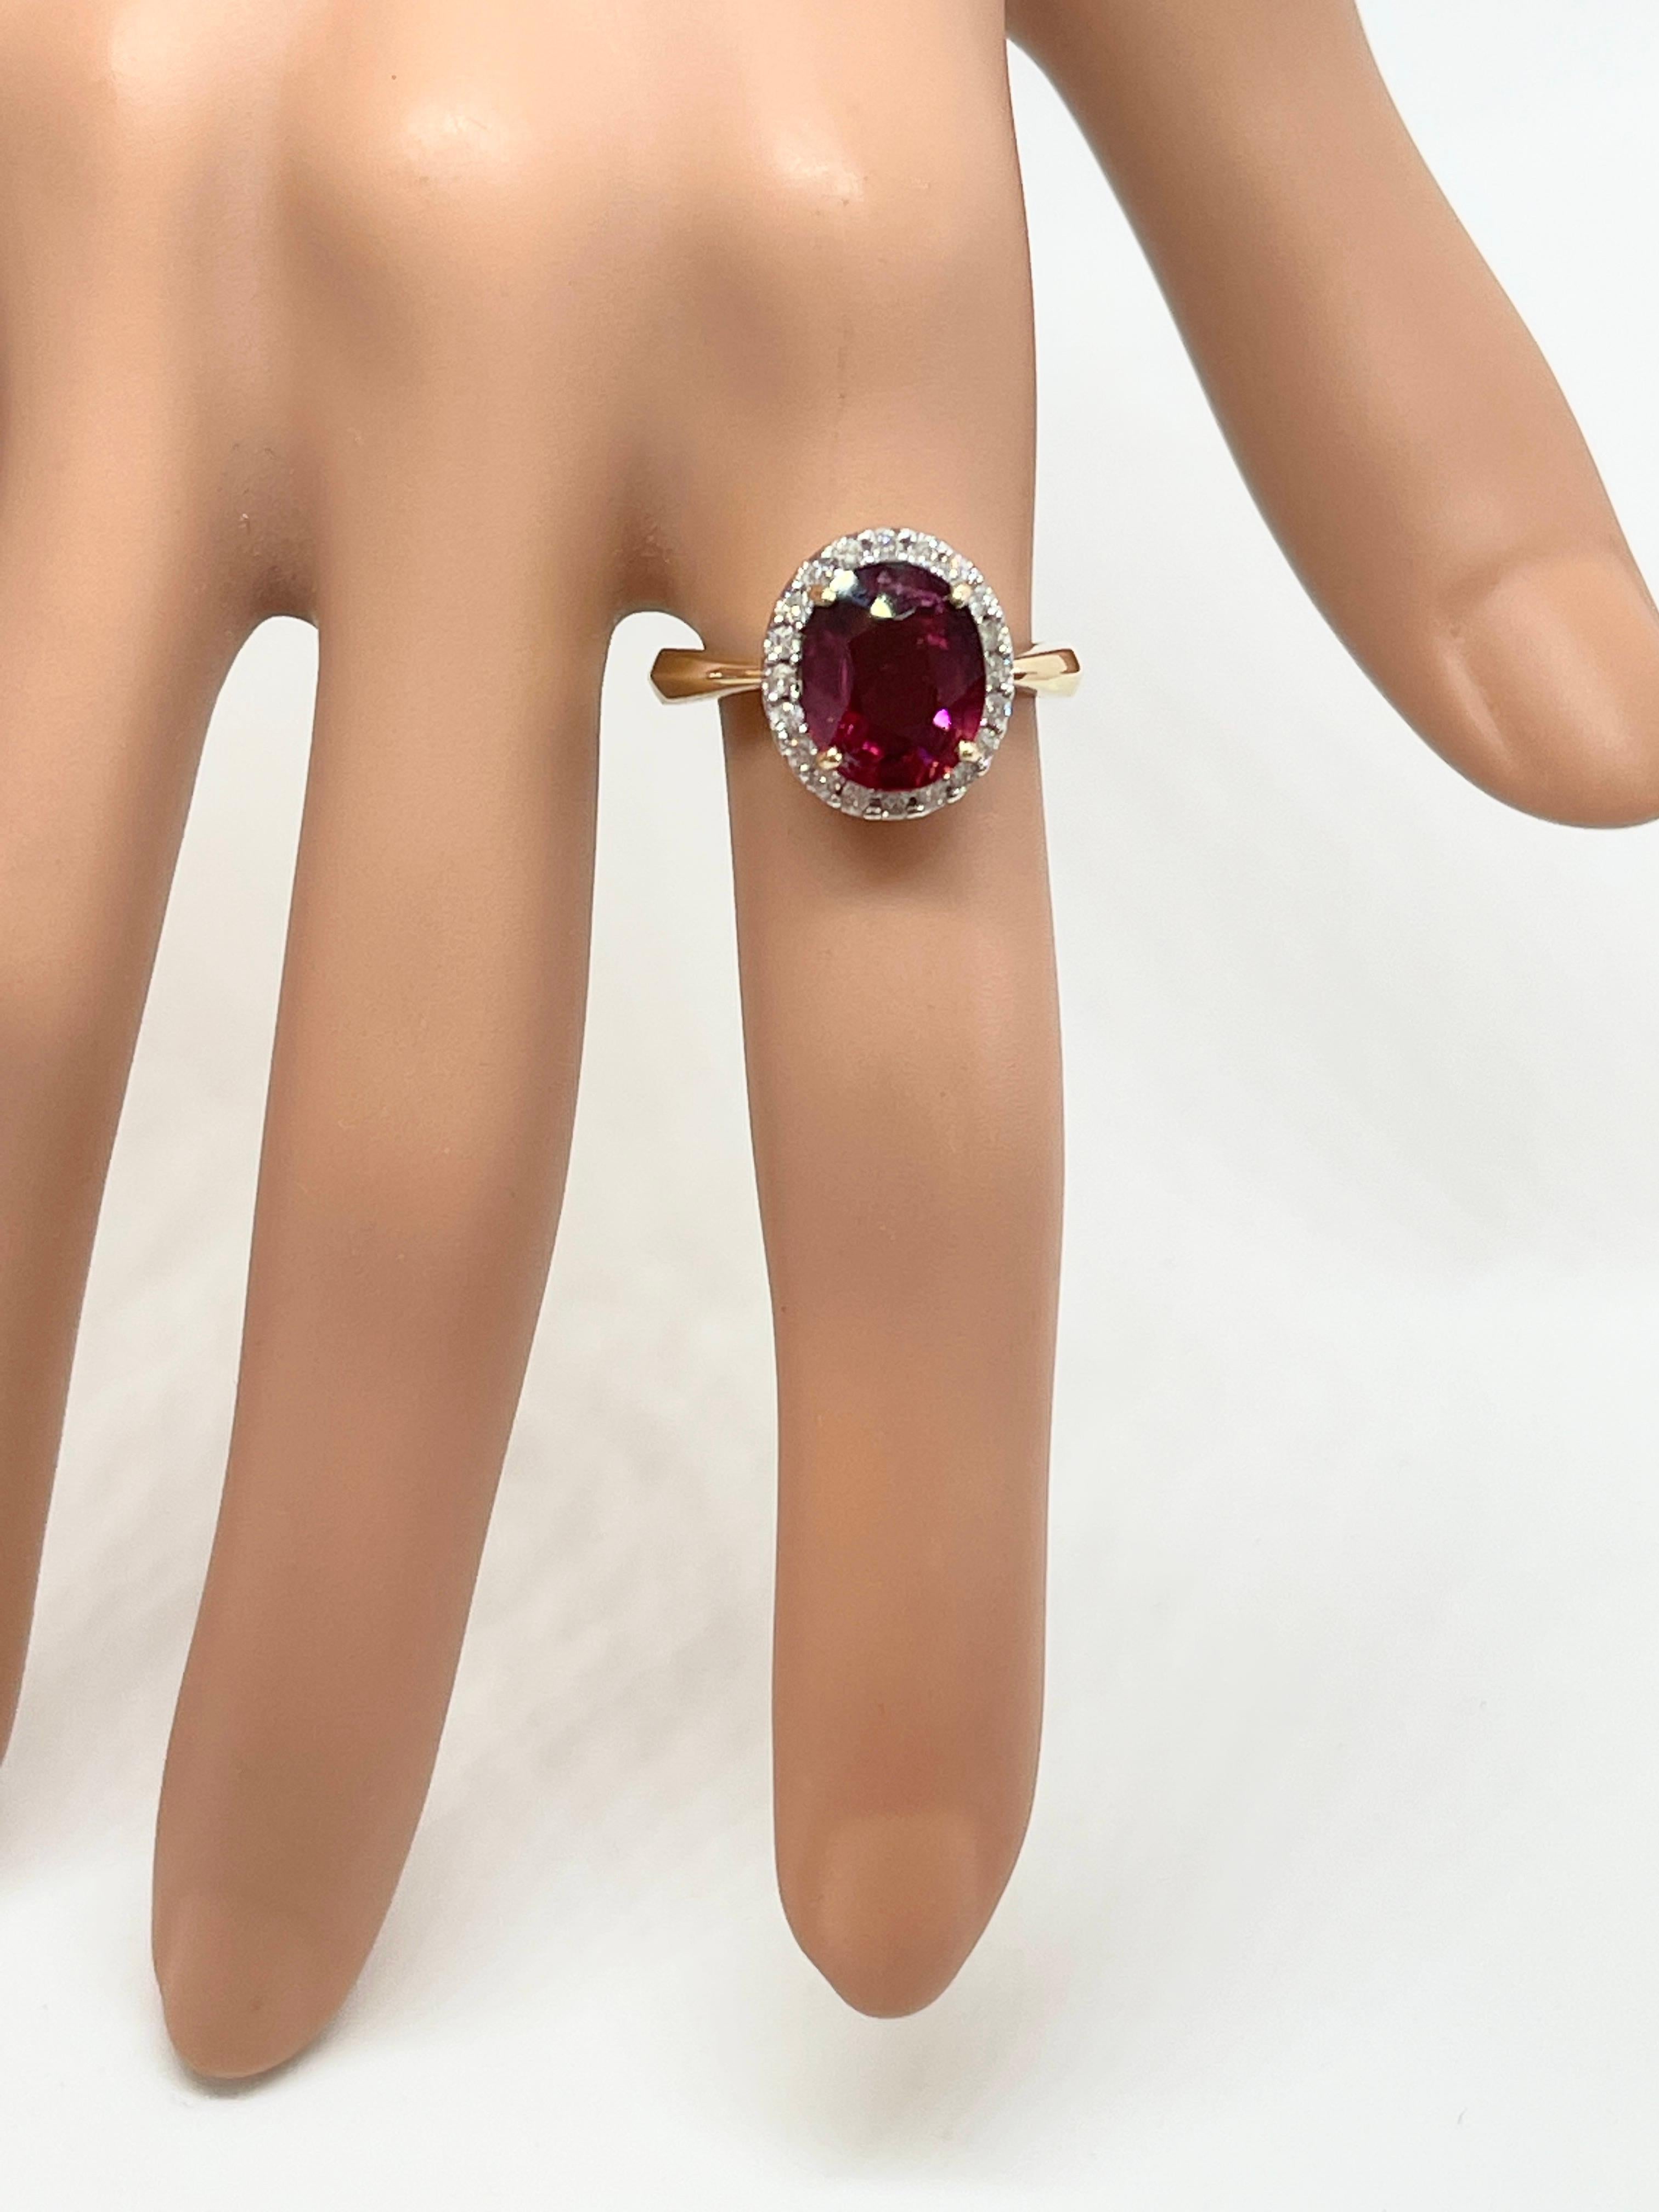 Oval Cut Genuine Natural Rubellite Tourmaline Diamond Halo Ring 9ct Yellow Gold Valuation For Sale